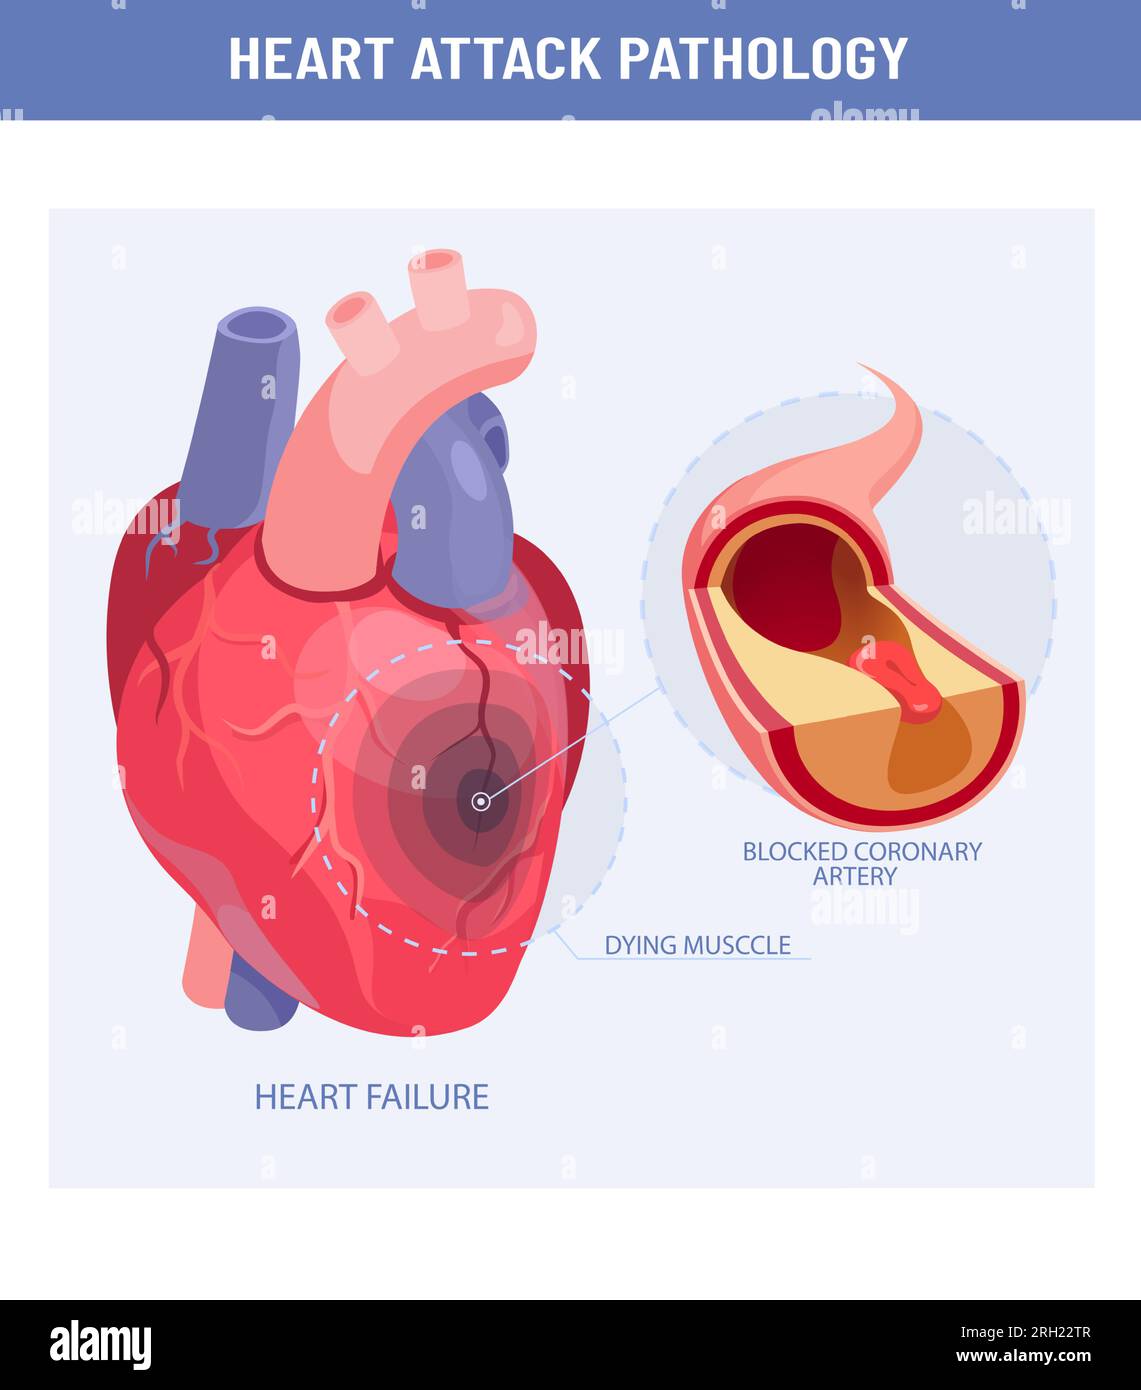 Heart attack and atherosclerosis medical illustration. Vector of a damaged heart, cross section of a coronary artery with atherosclerotic plaque Stock Vector